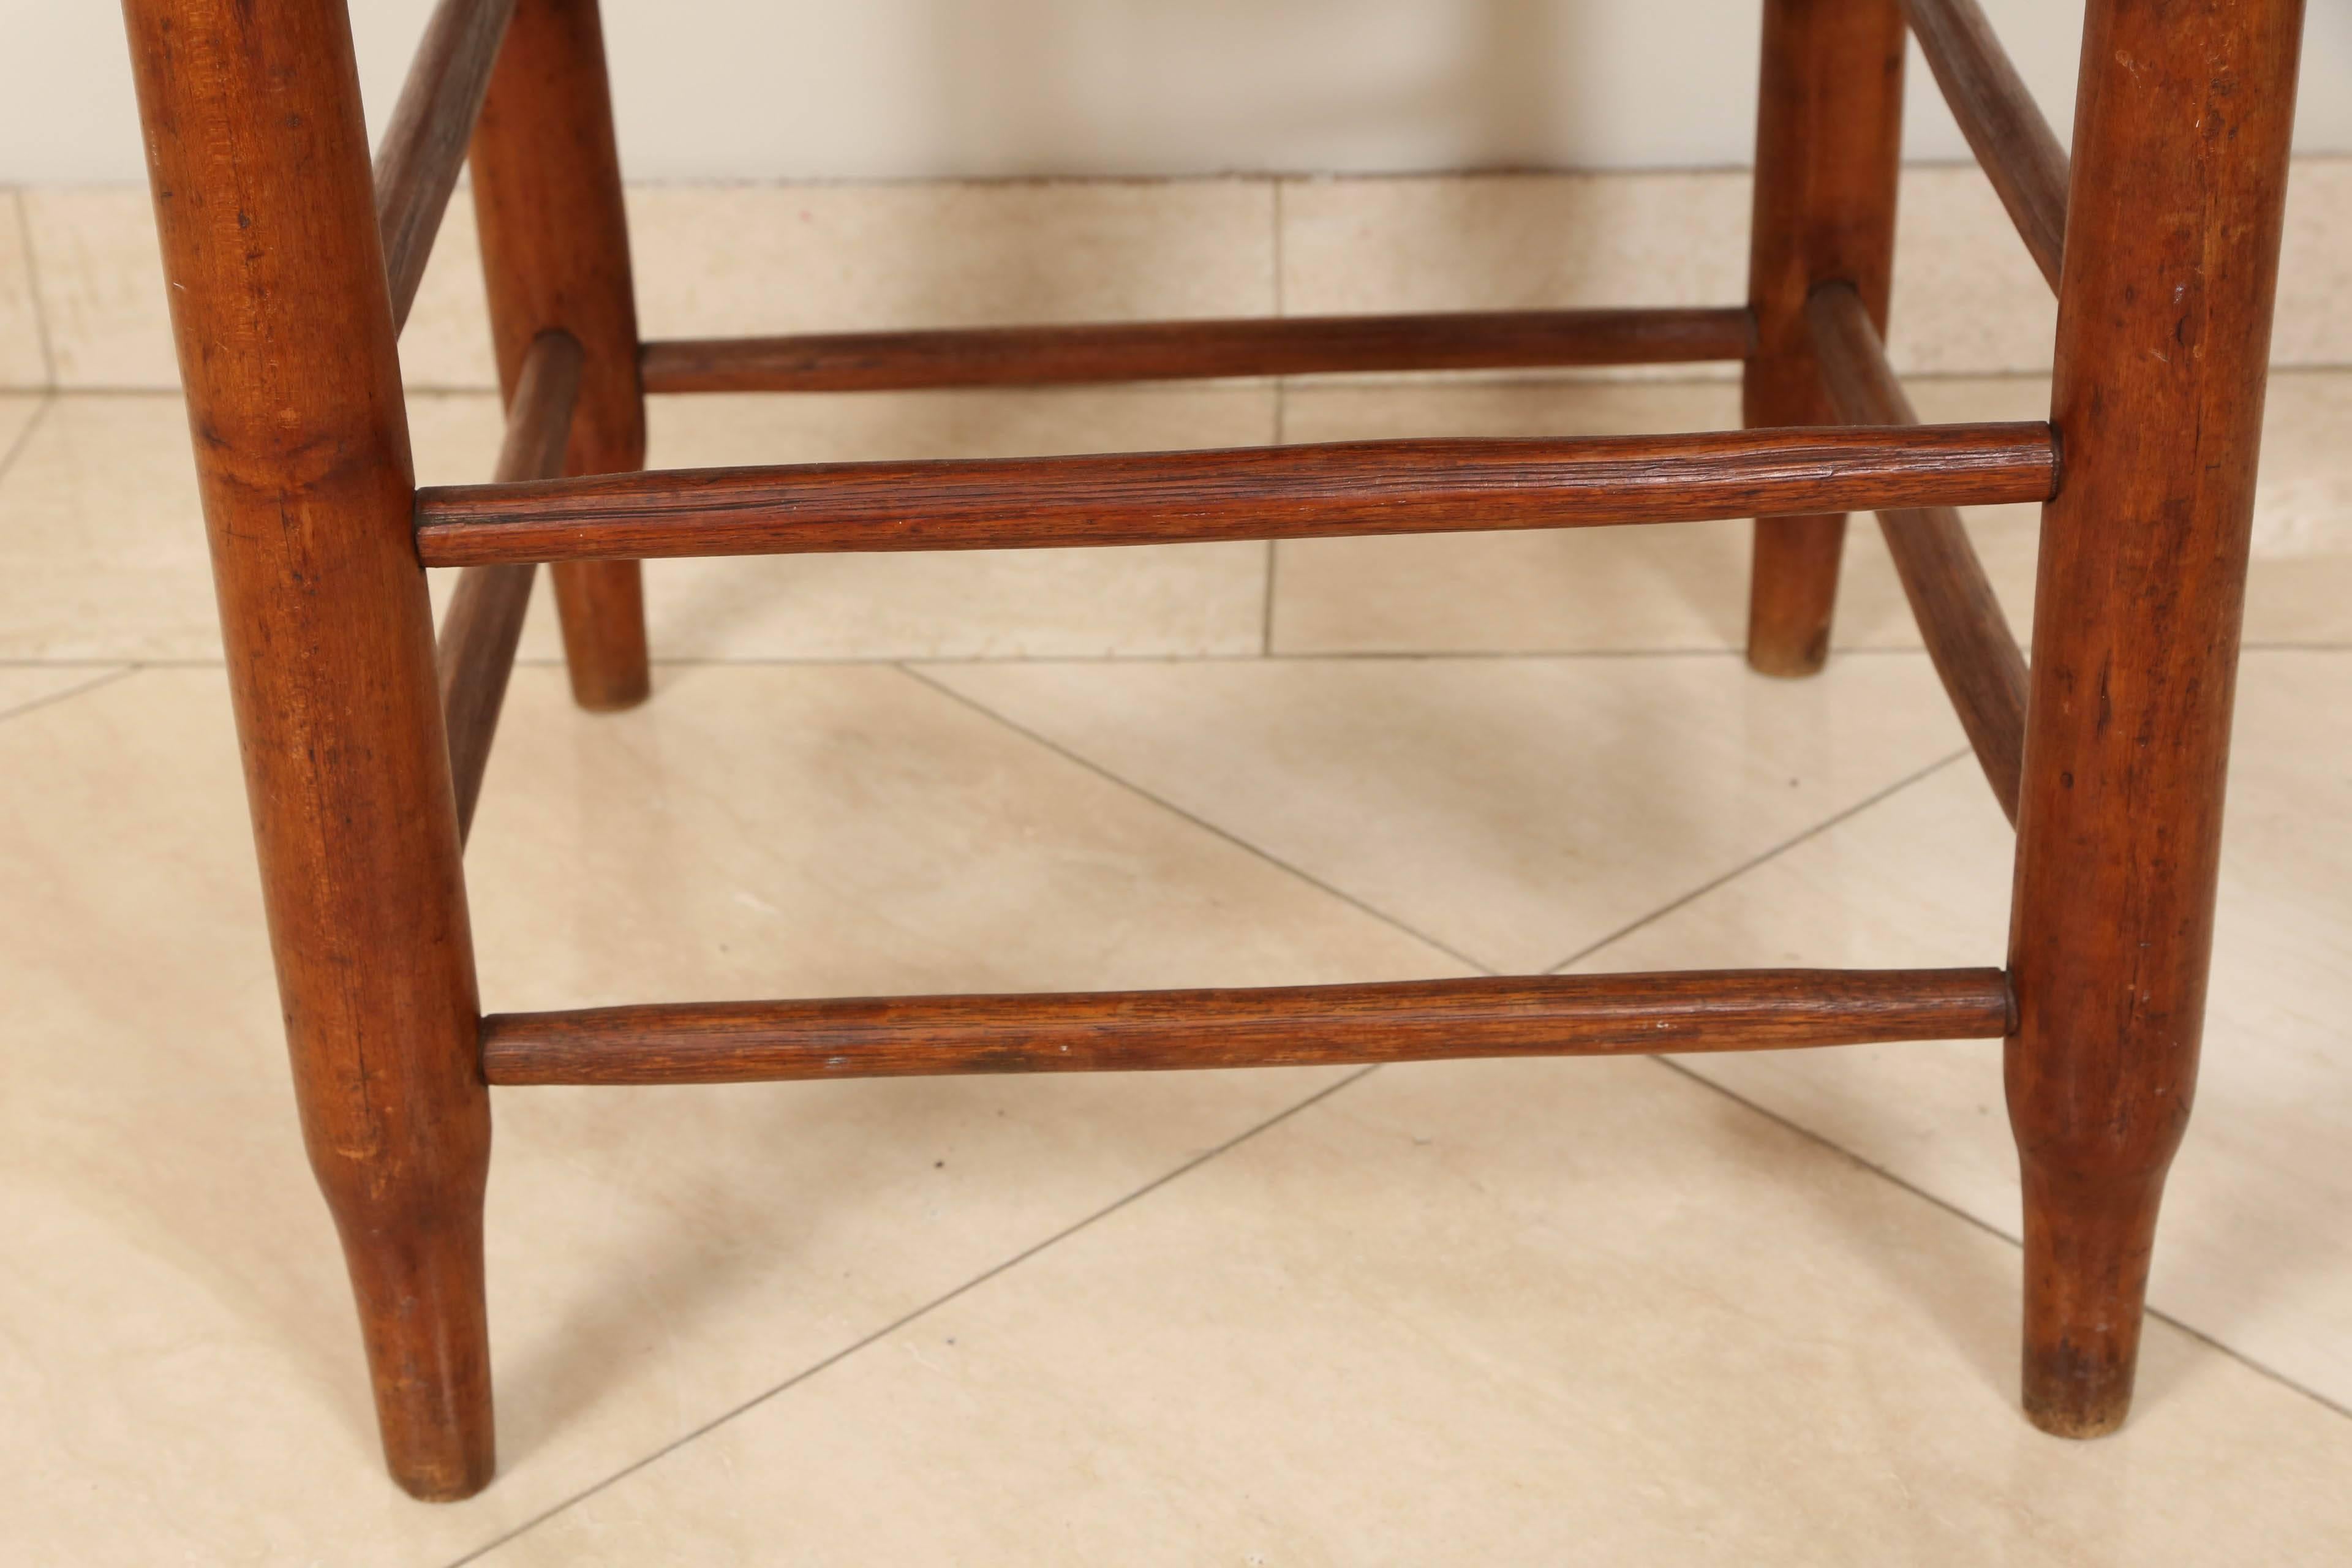 20th Century Wooden French Provincial Country Oak Stool with Woven Reed seating